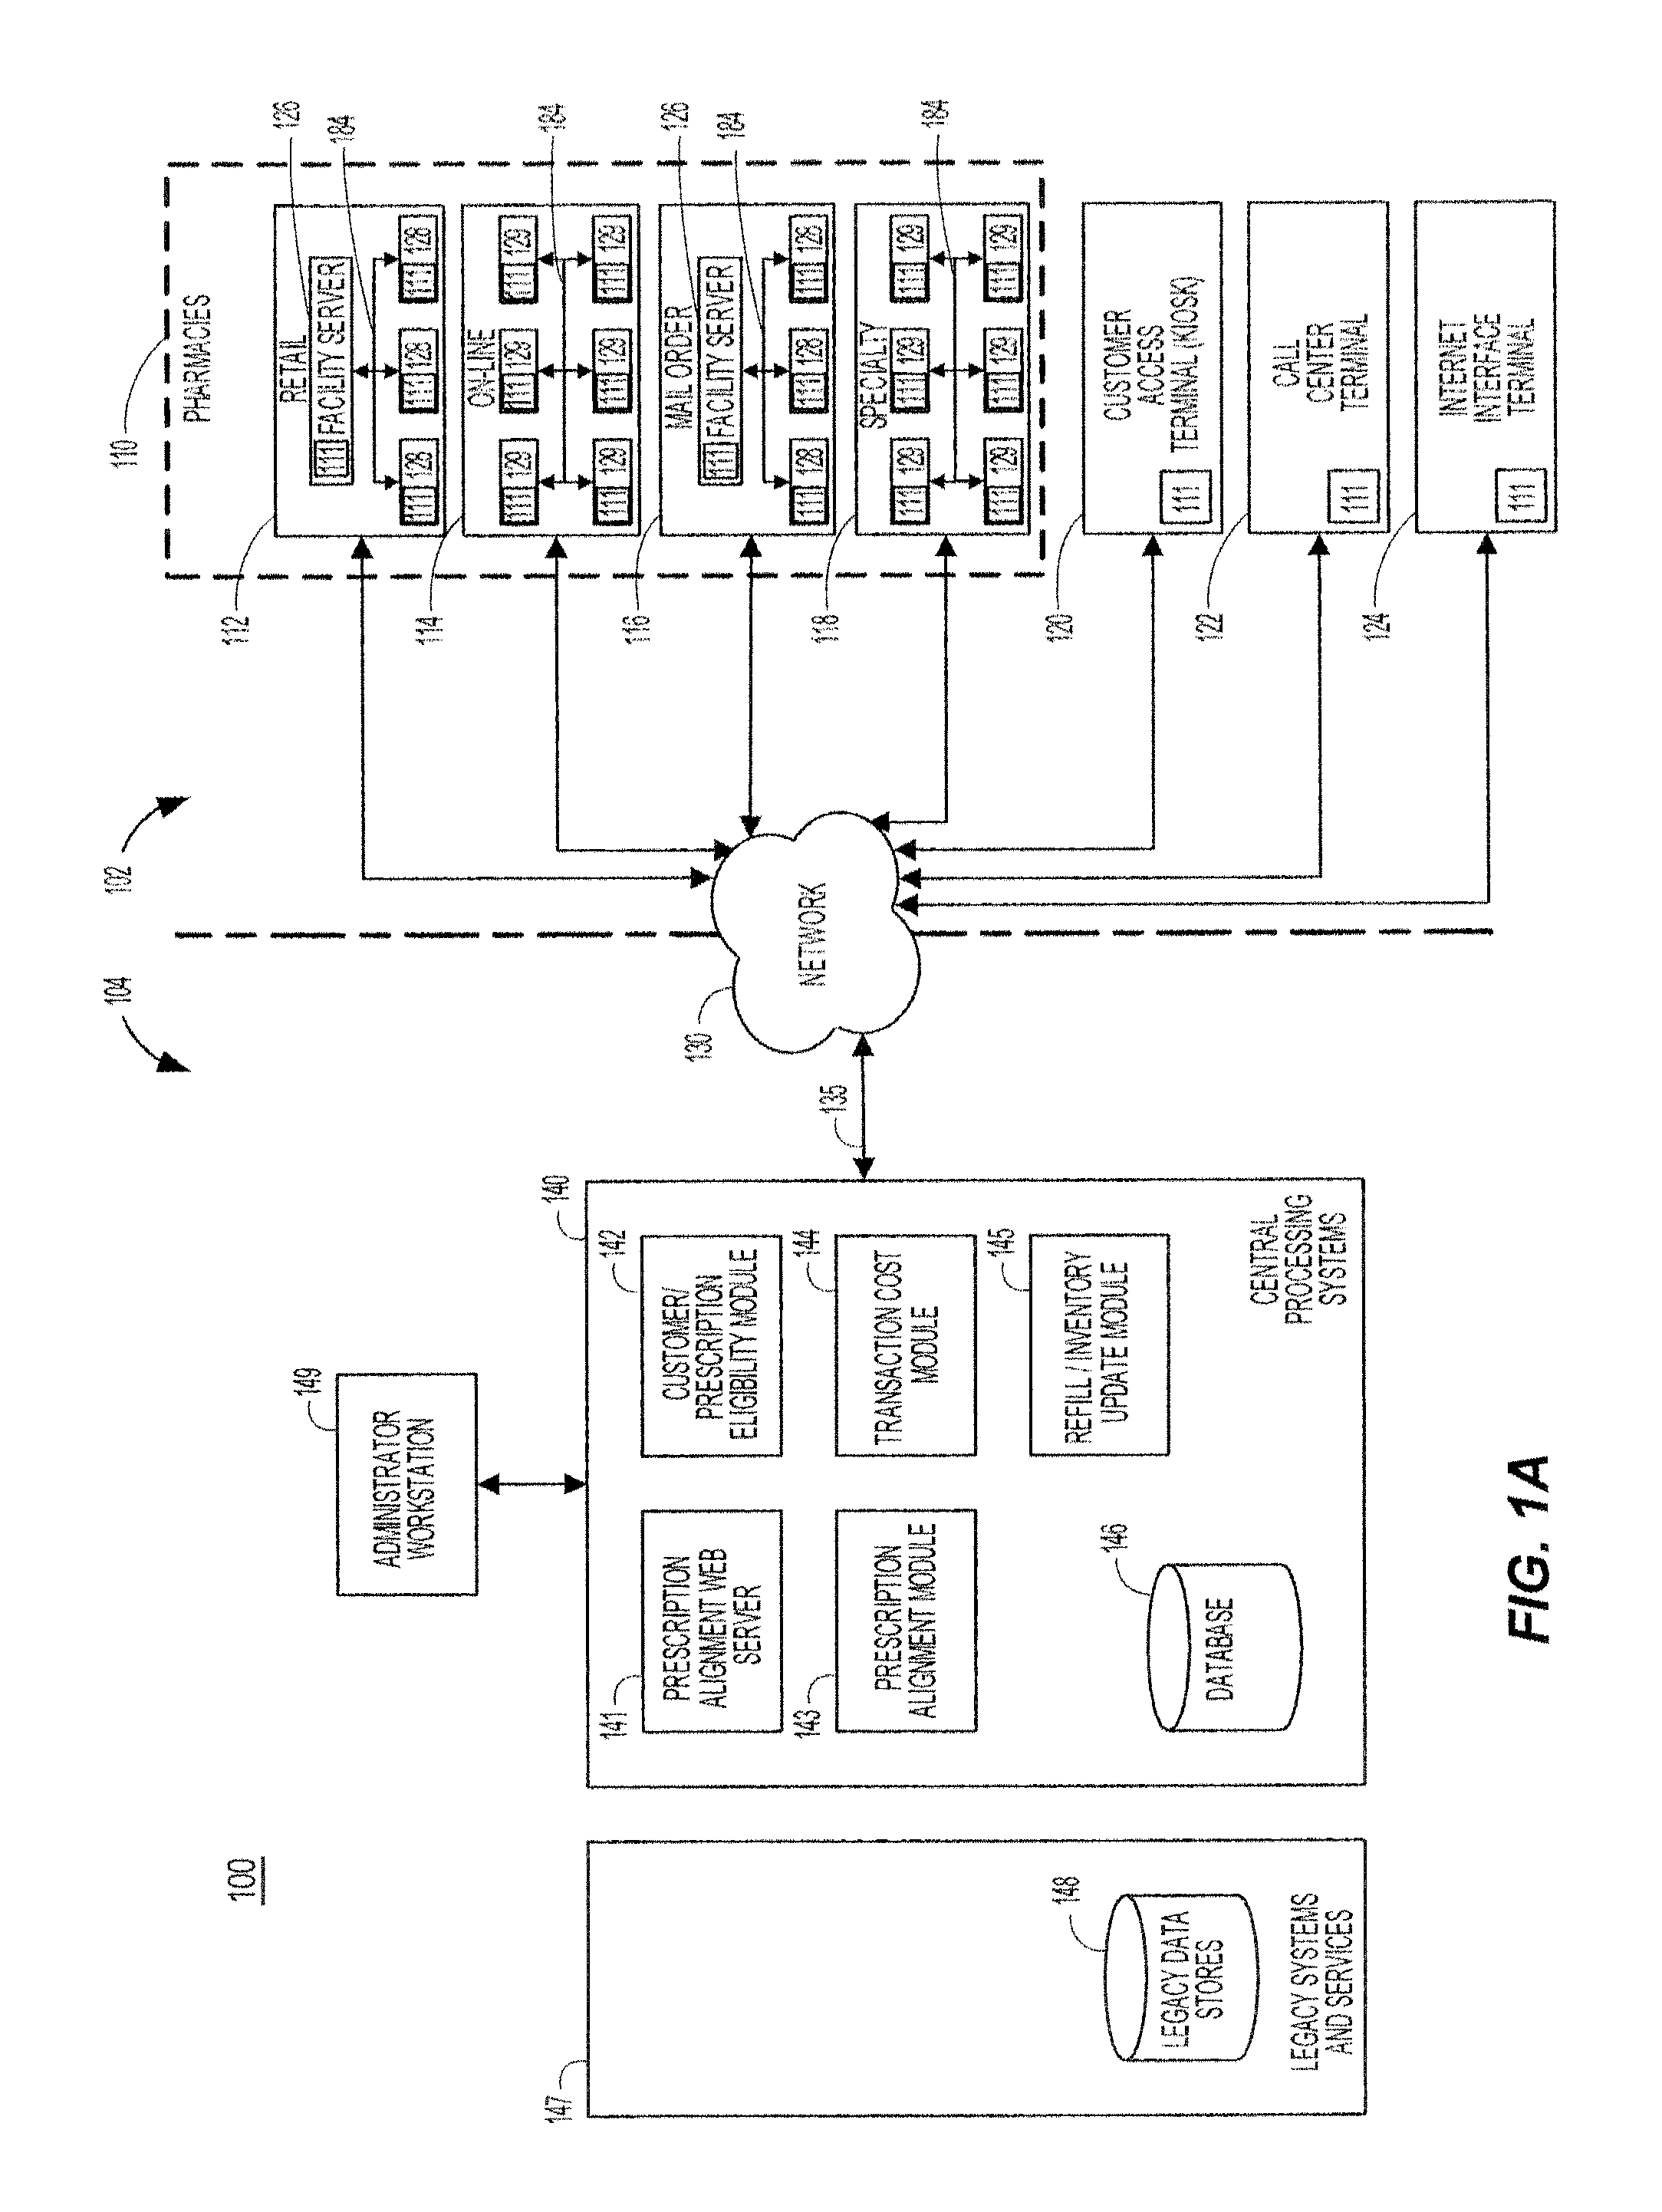 Method and system for aligning a plurality of prescription refills to multiple alignment dates